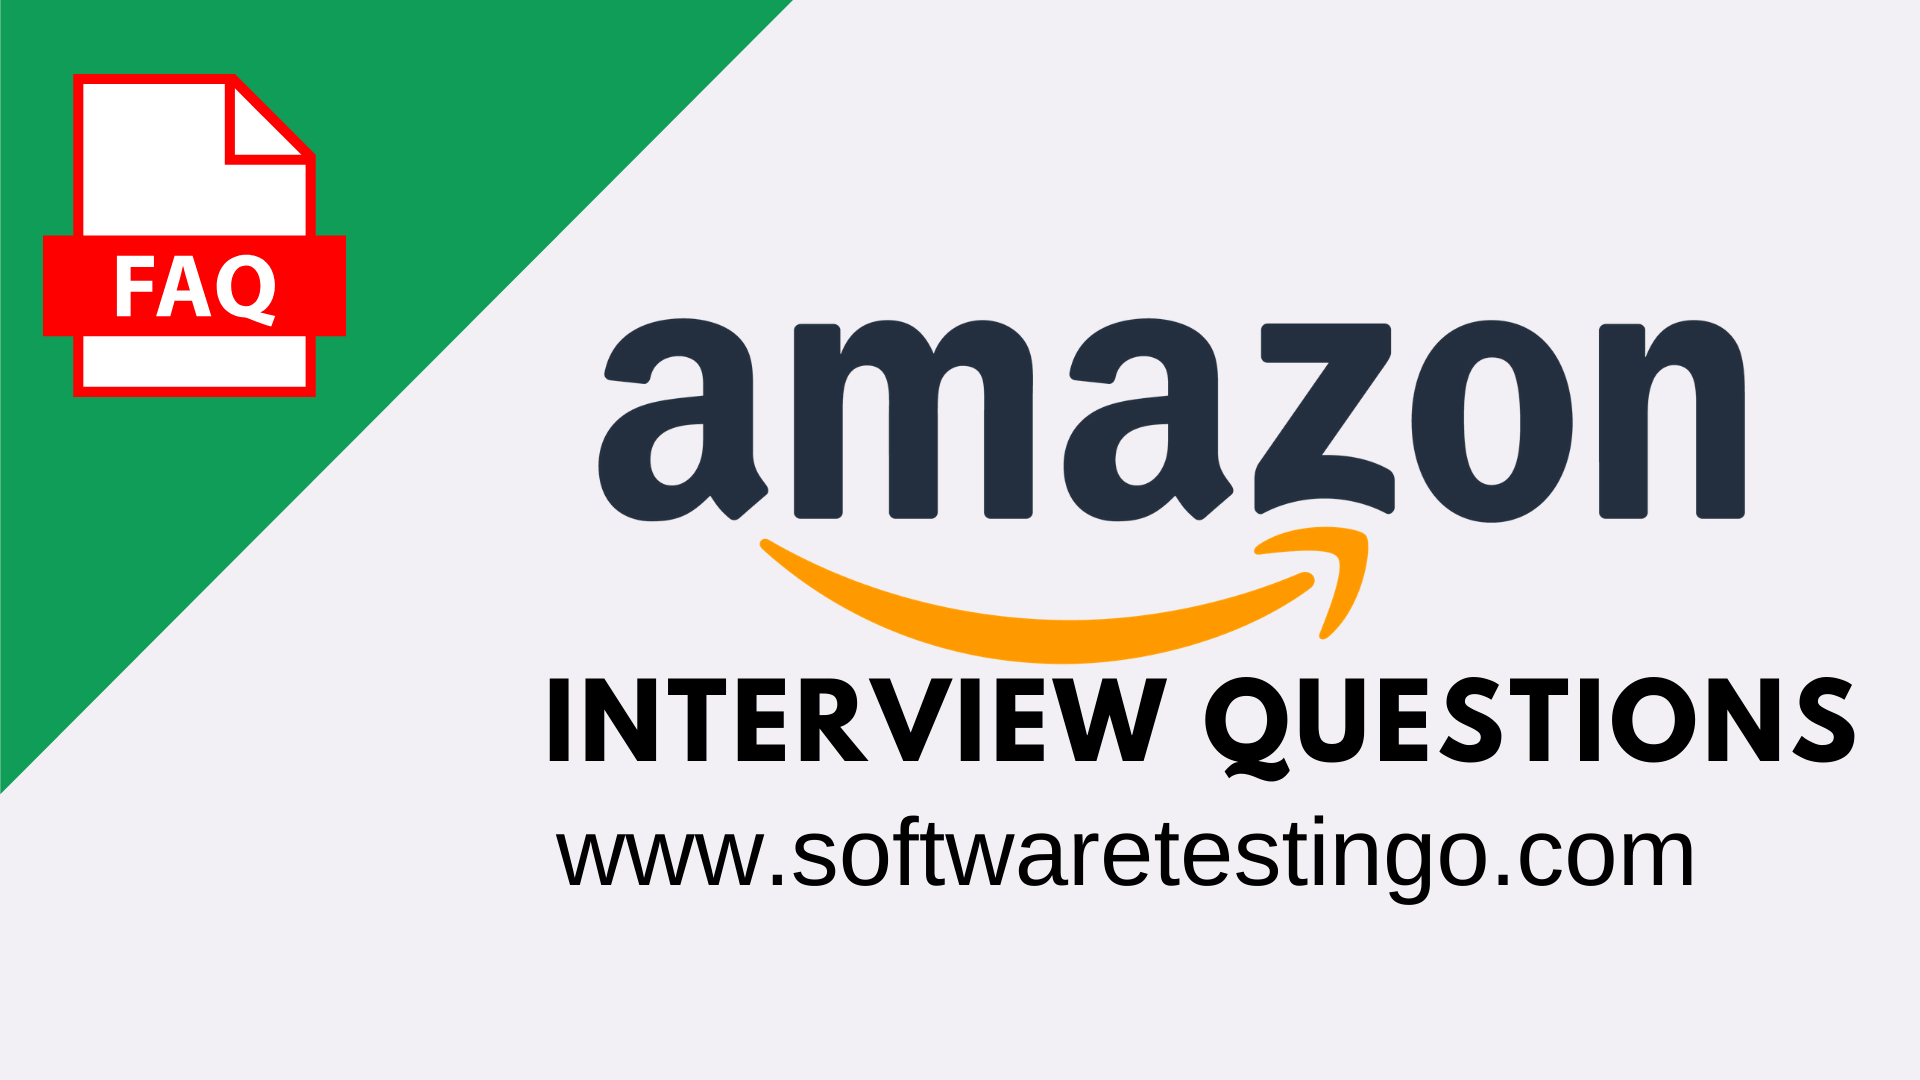 Amazon Interview Questions